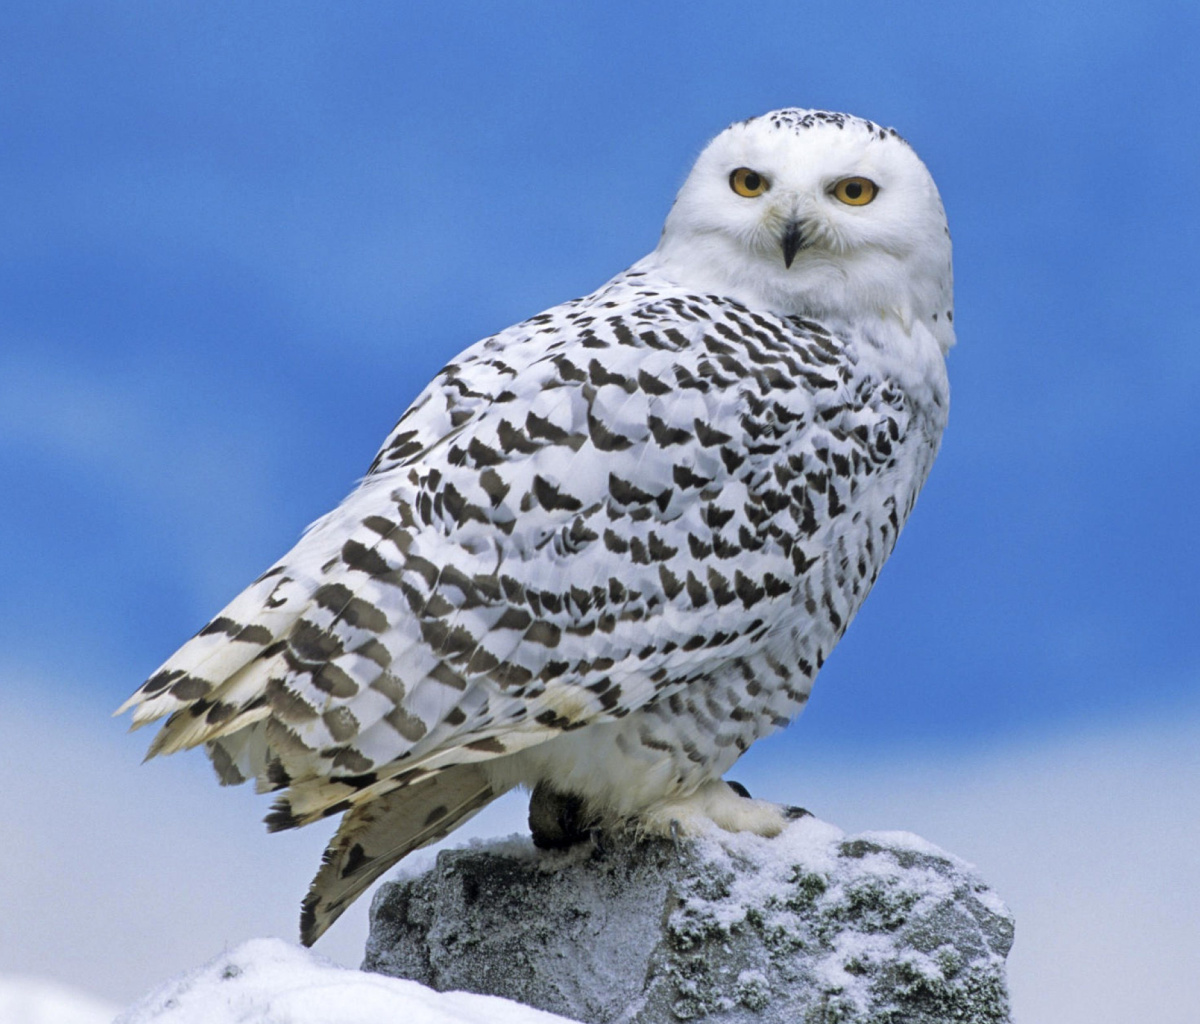 Snowy owl from Arctic wallpaper 1200x1024